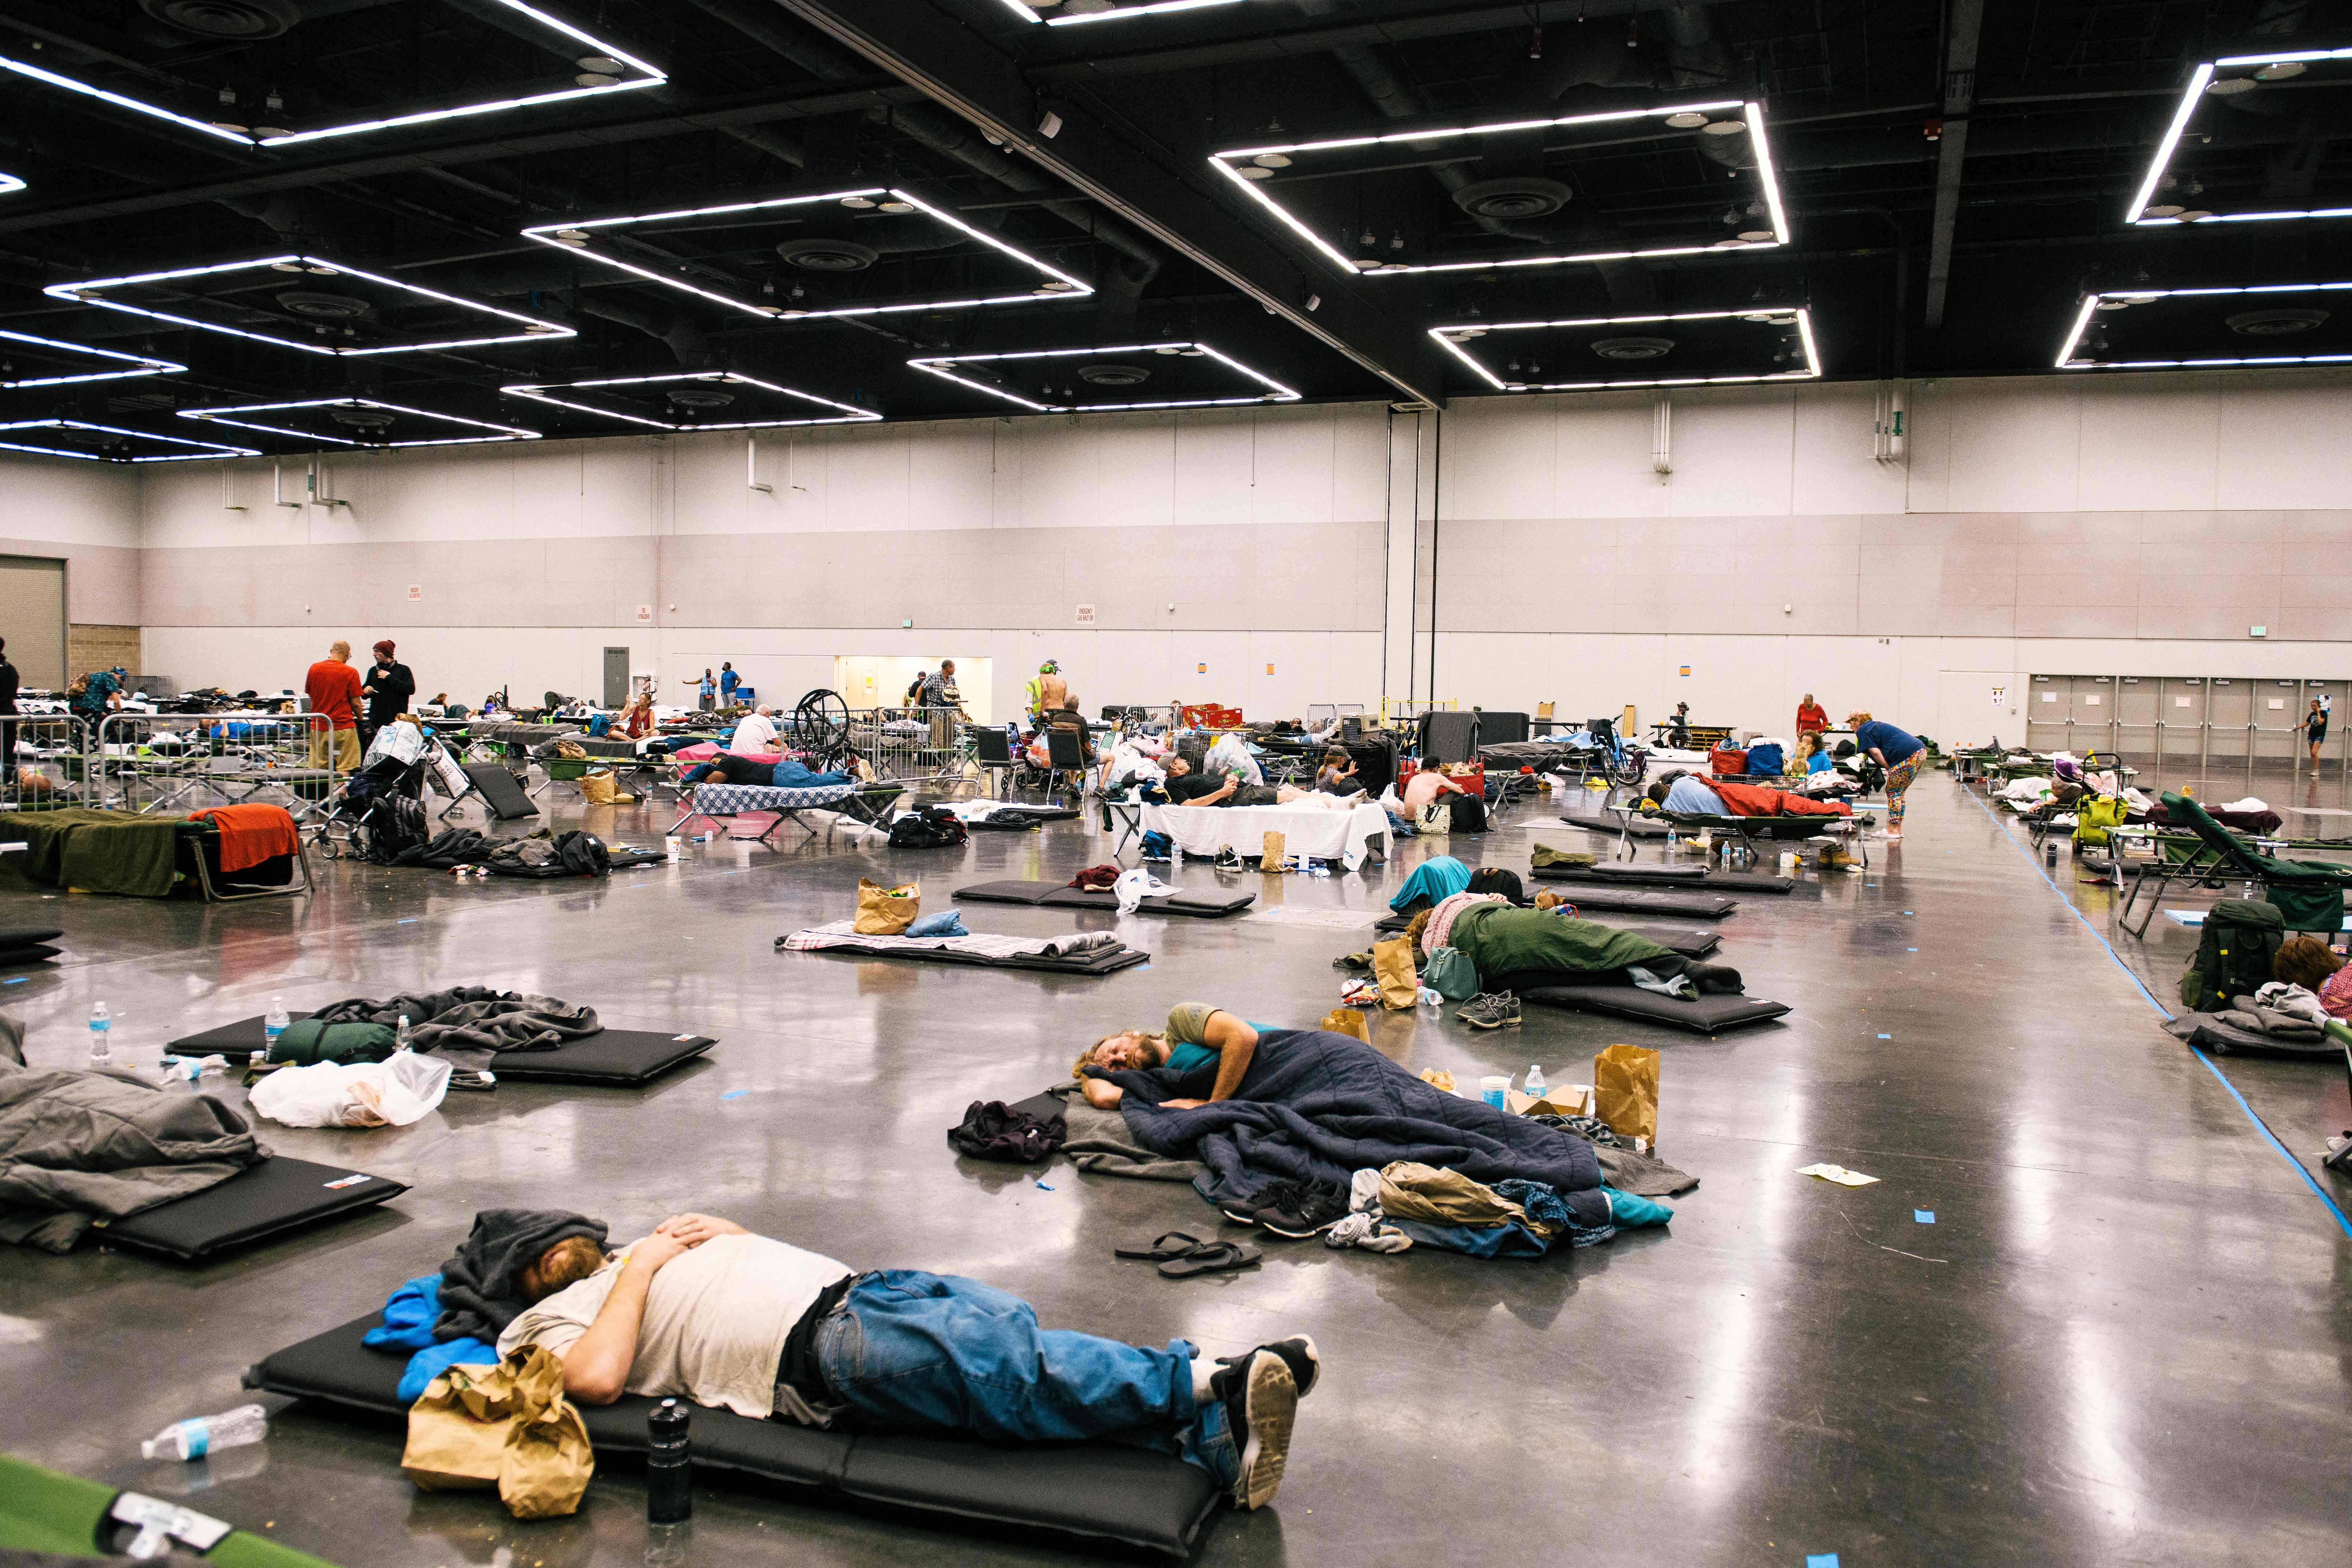 People resting at a cooling station in Portland, Oregon, during a extreme heatwave in July 2021.